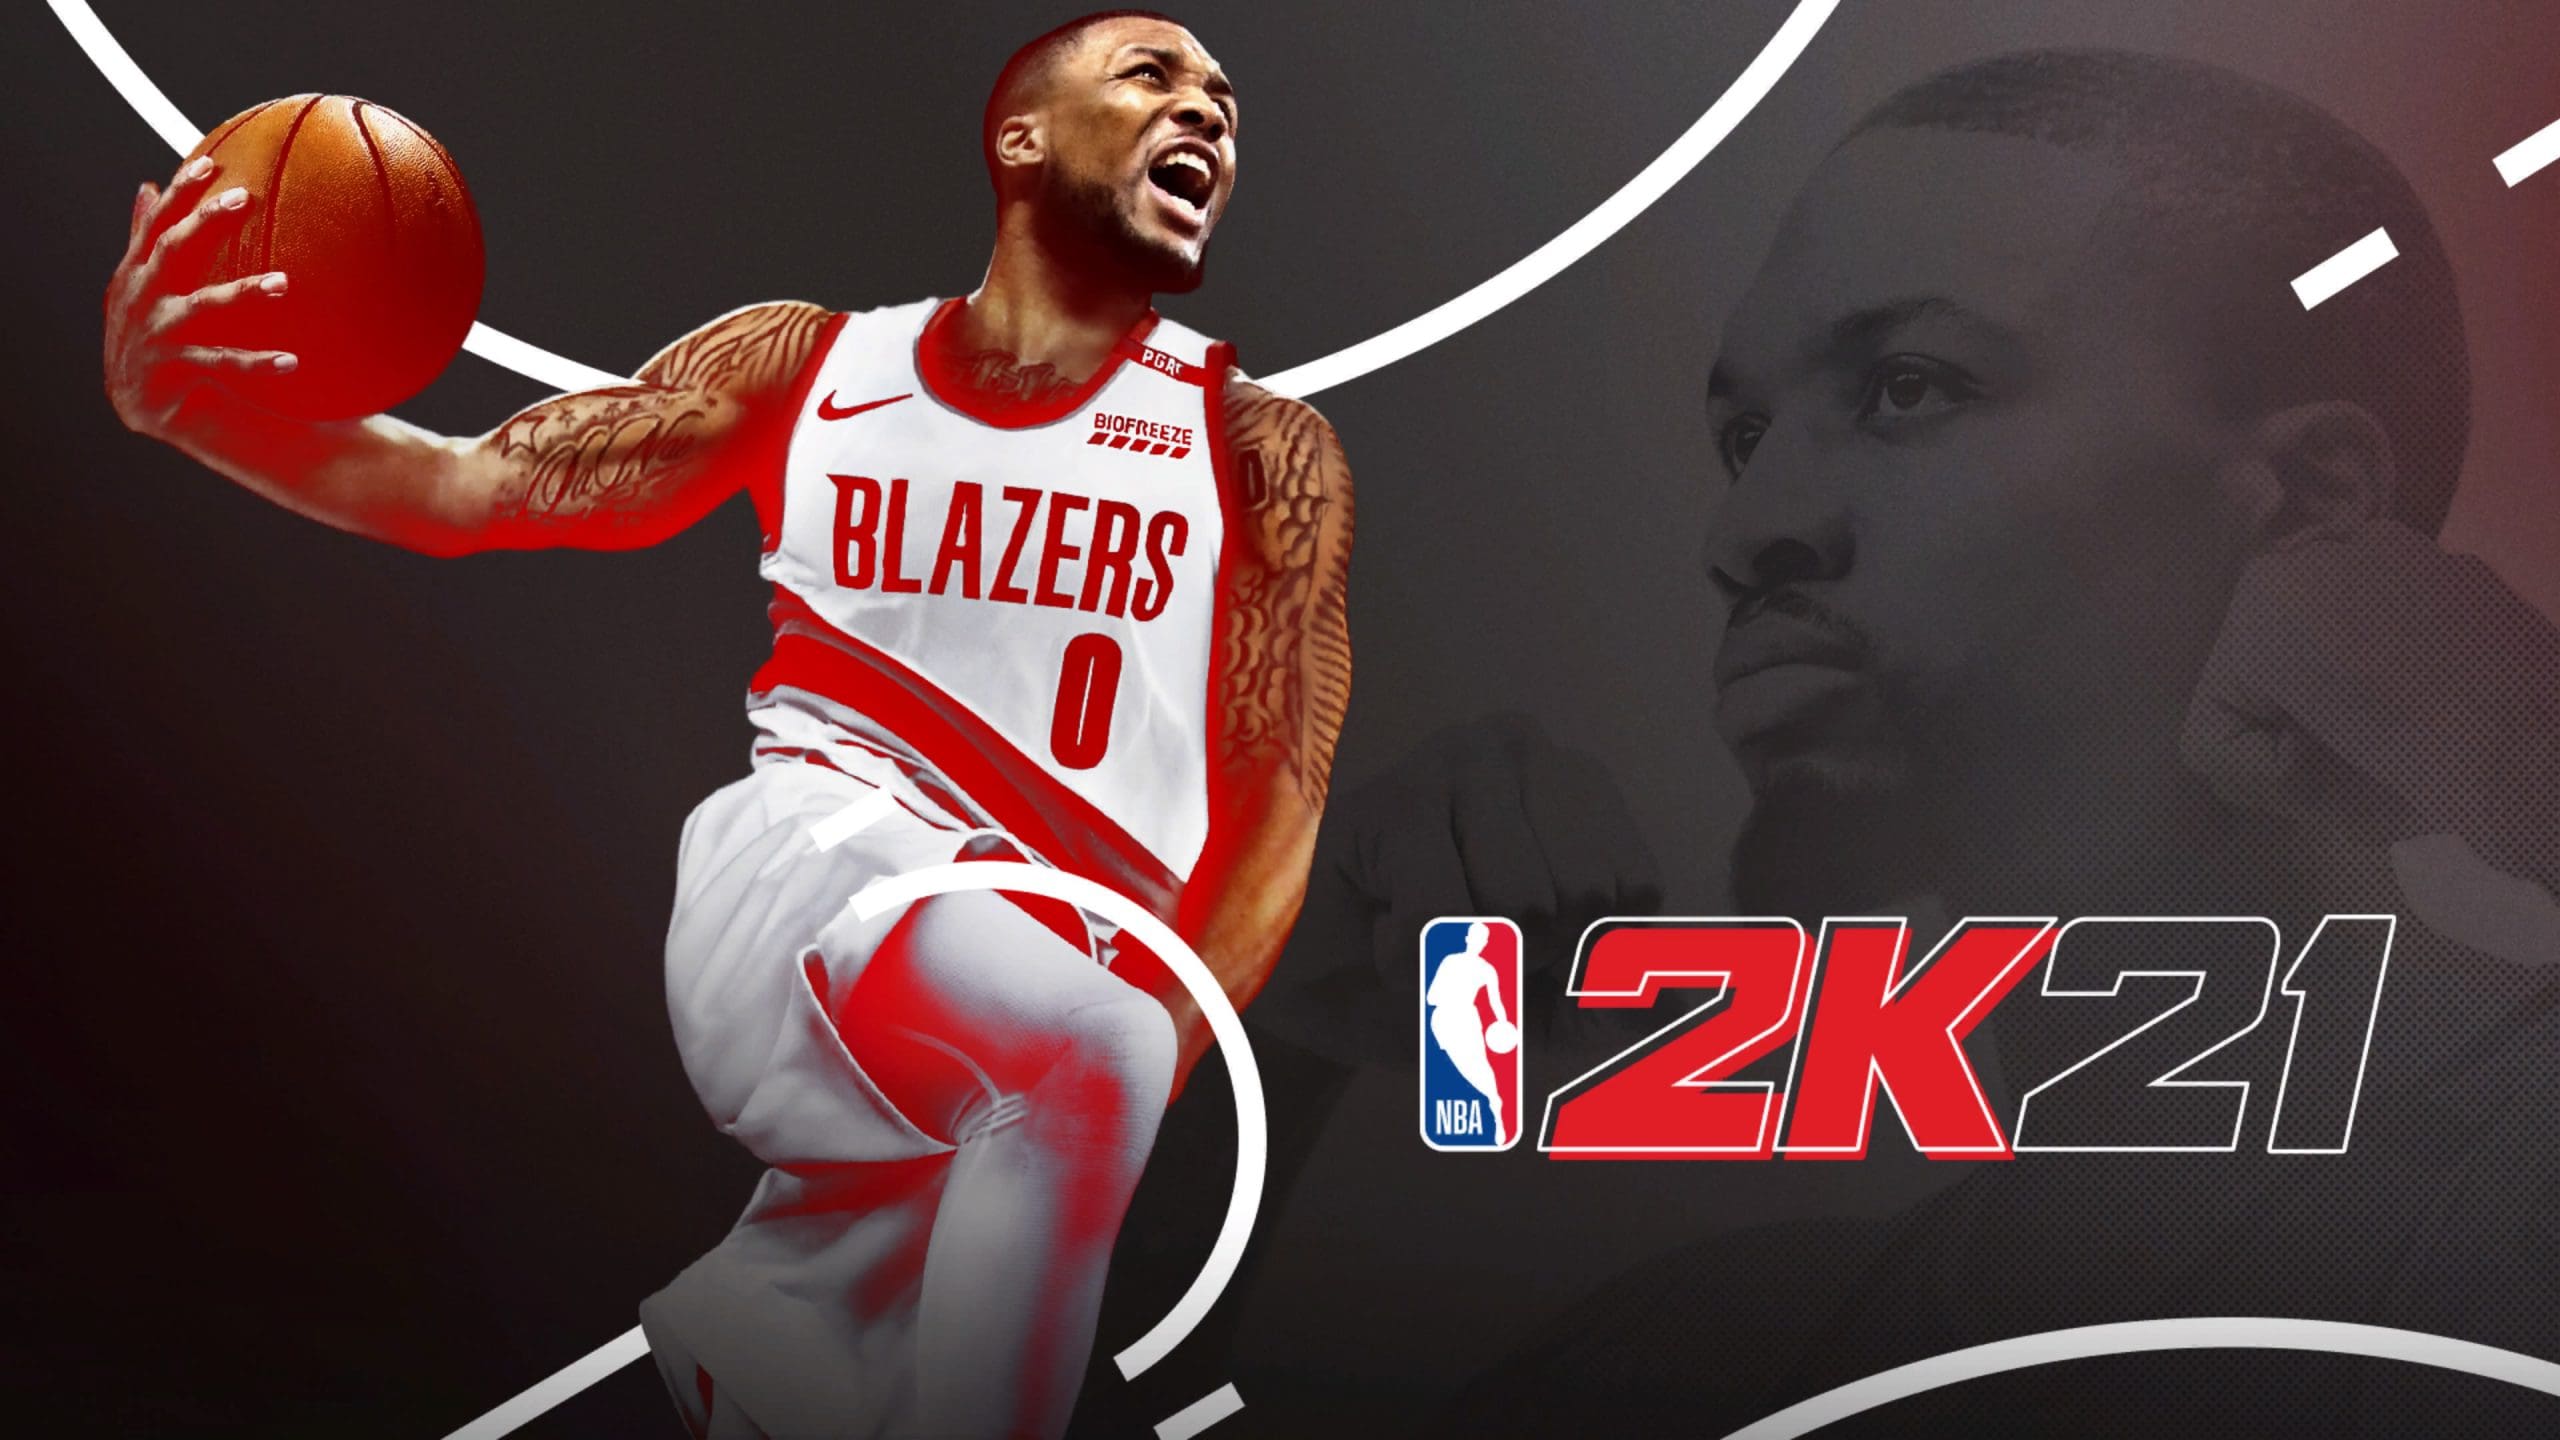 NBA 2k21 Featured Image.